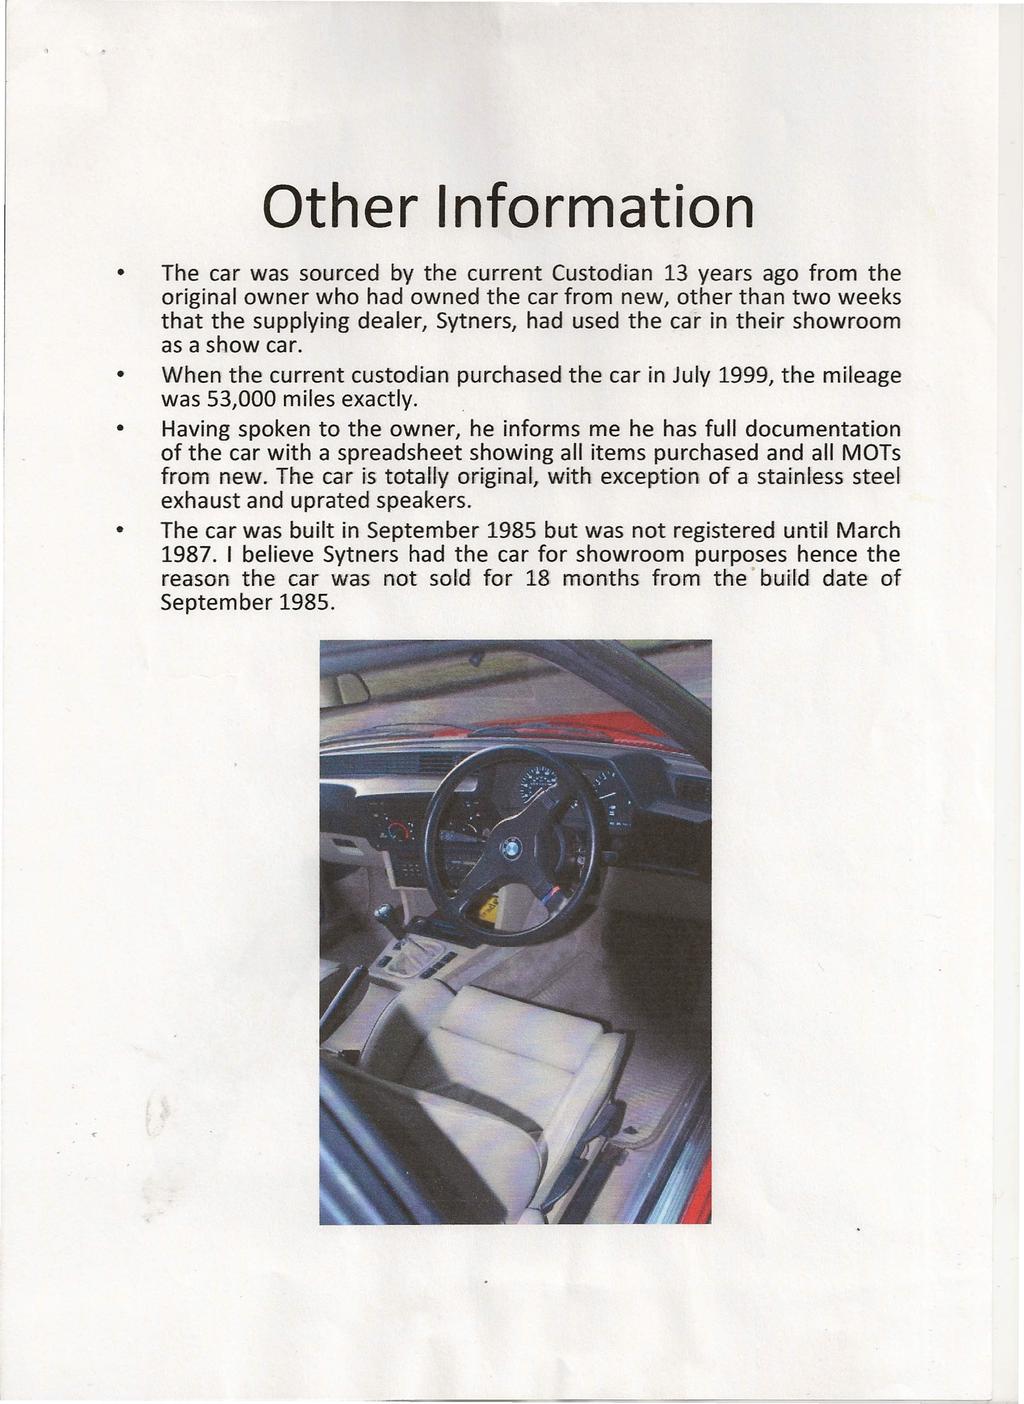 Other Information The car was sourced by the current Custodian 13 years ago from the original owner who had owned the car from new, other than two weeks that the supplying dealer, Sytners, had used